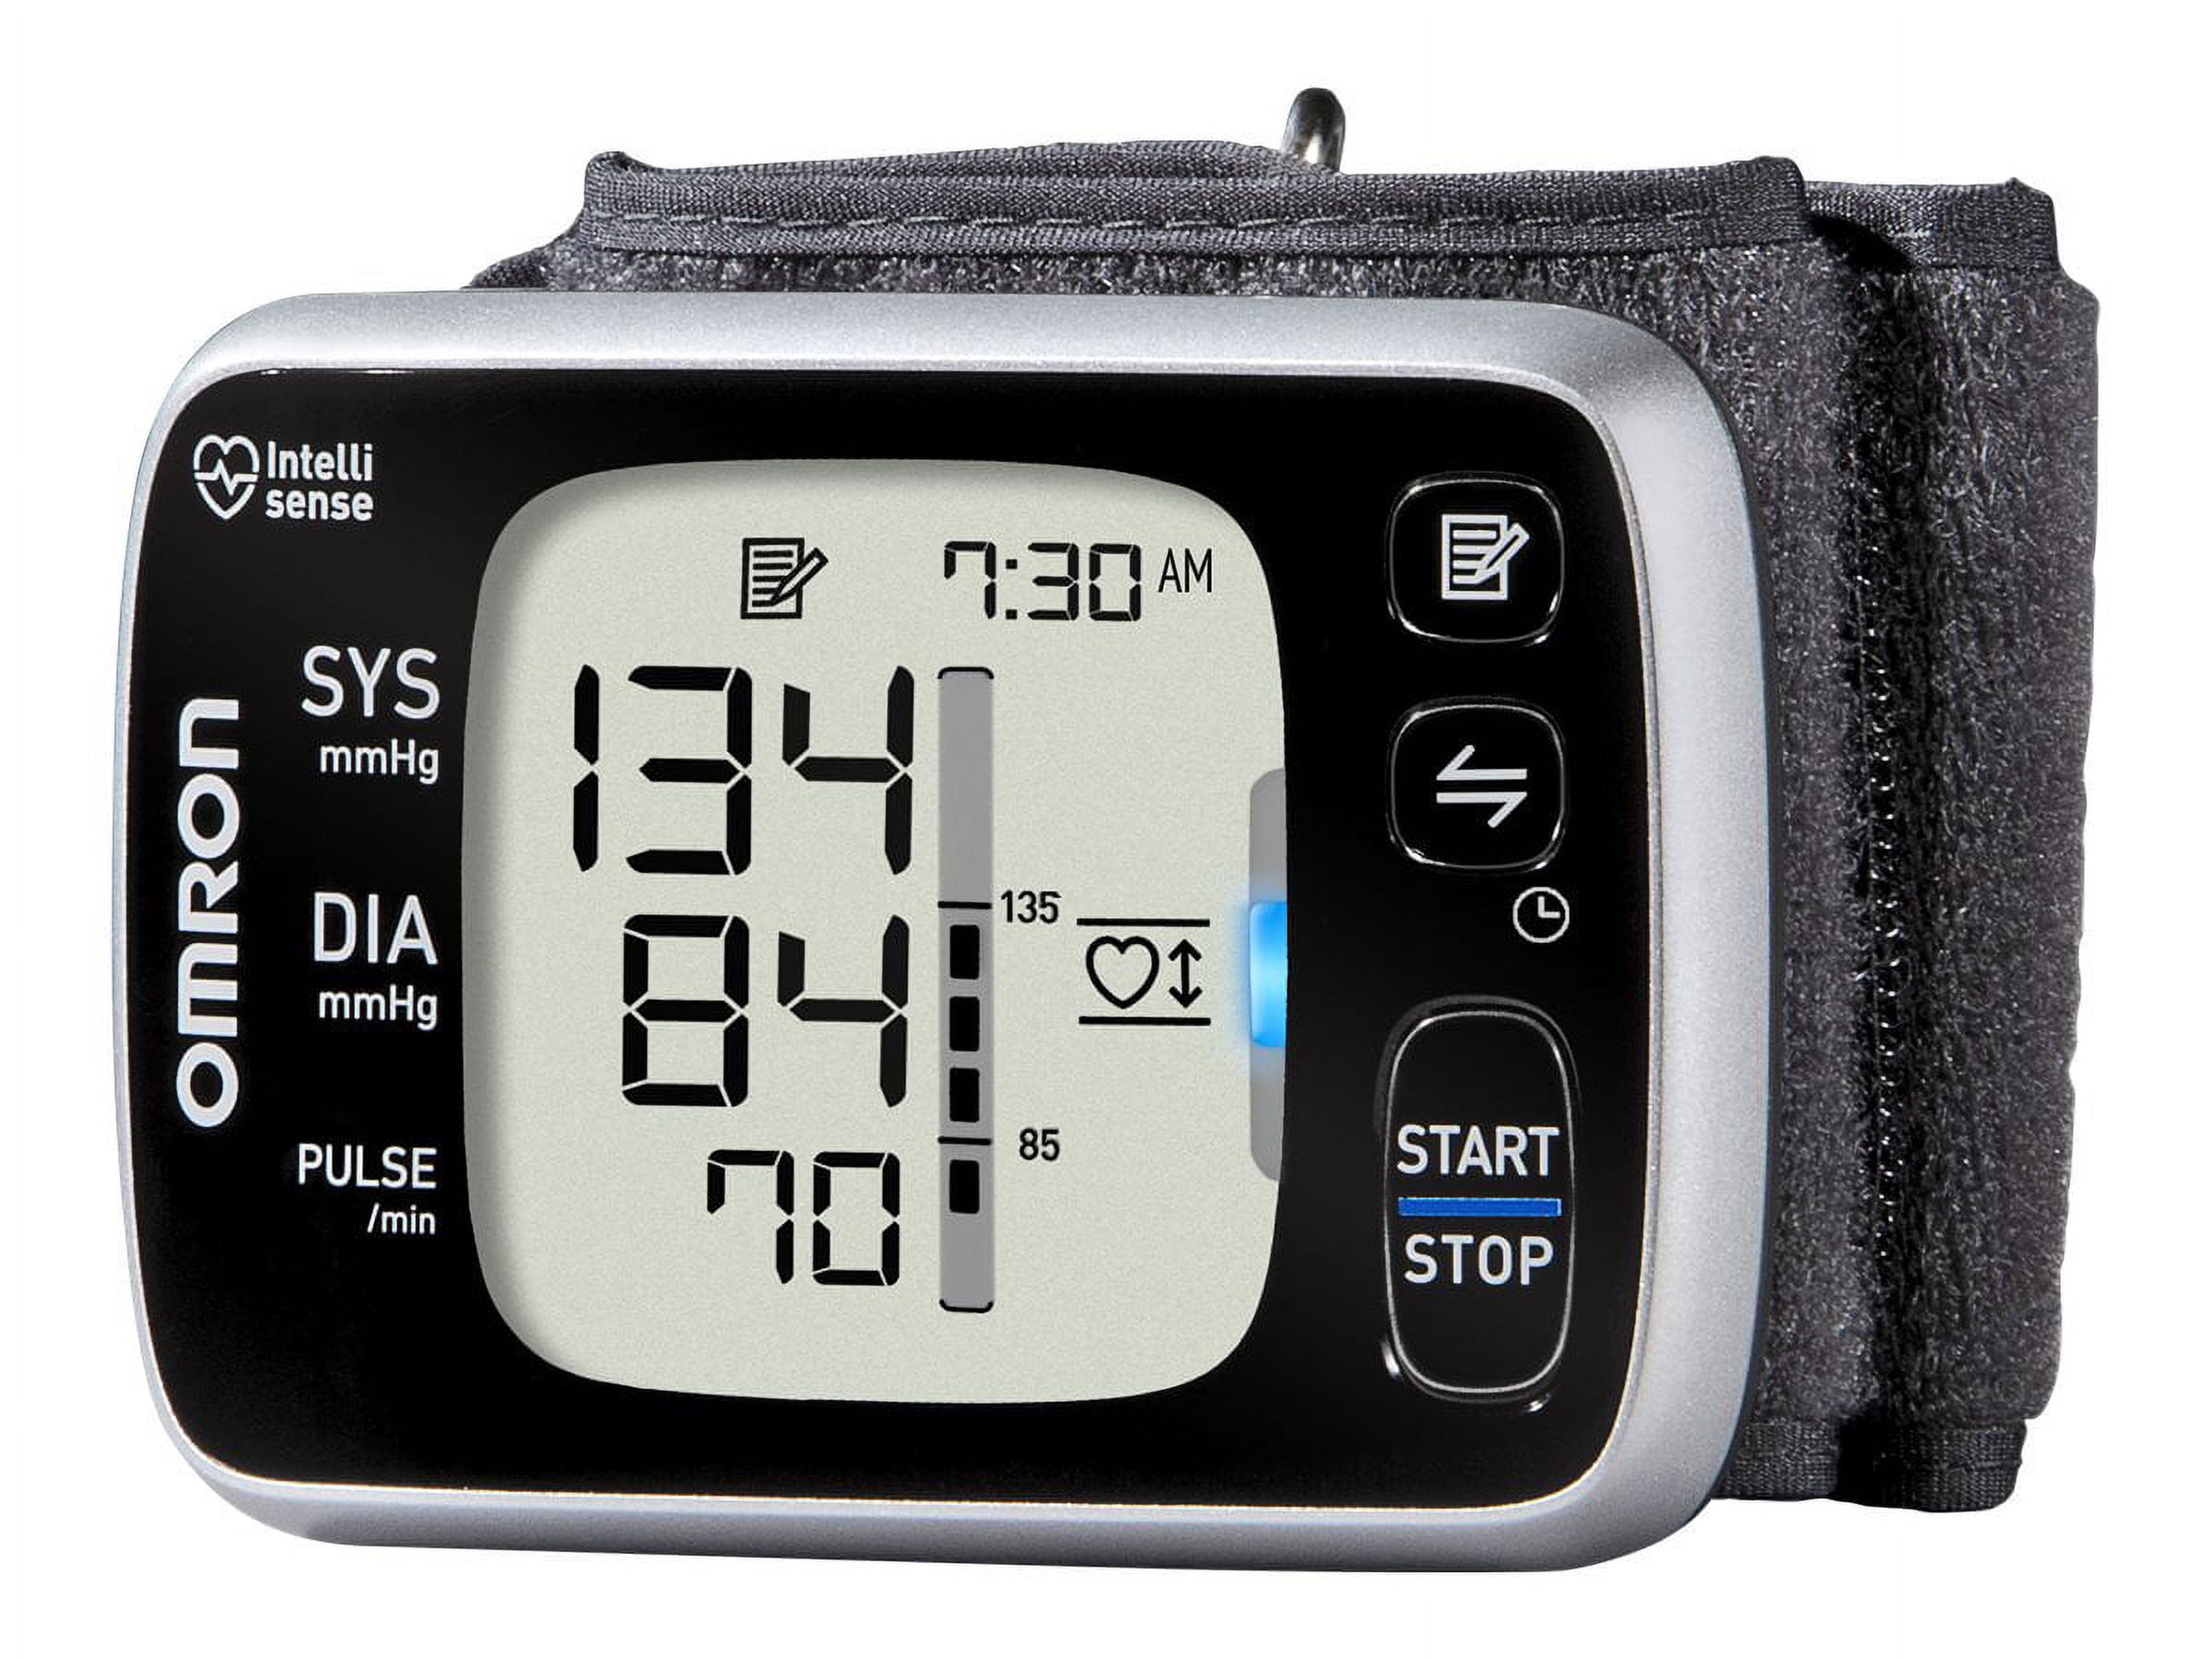 Spotlight On Omron's 10 Series Blood Pressure Monitor with